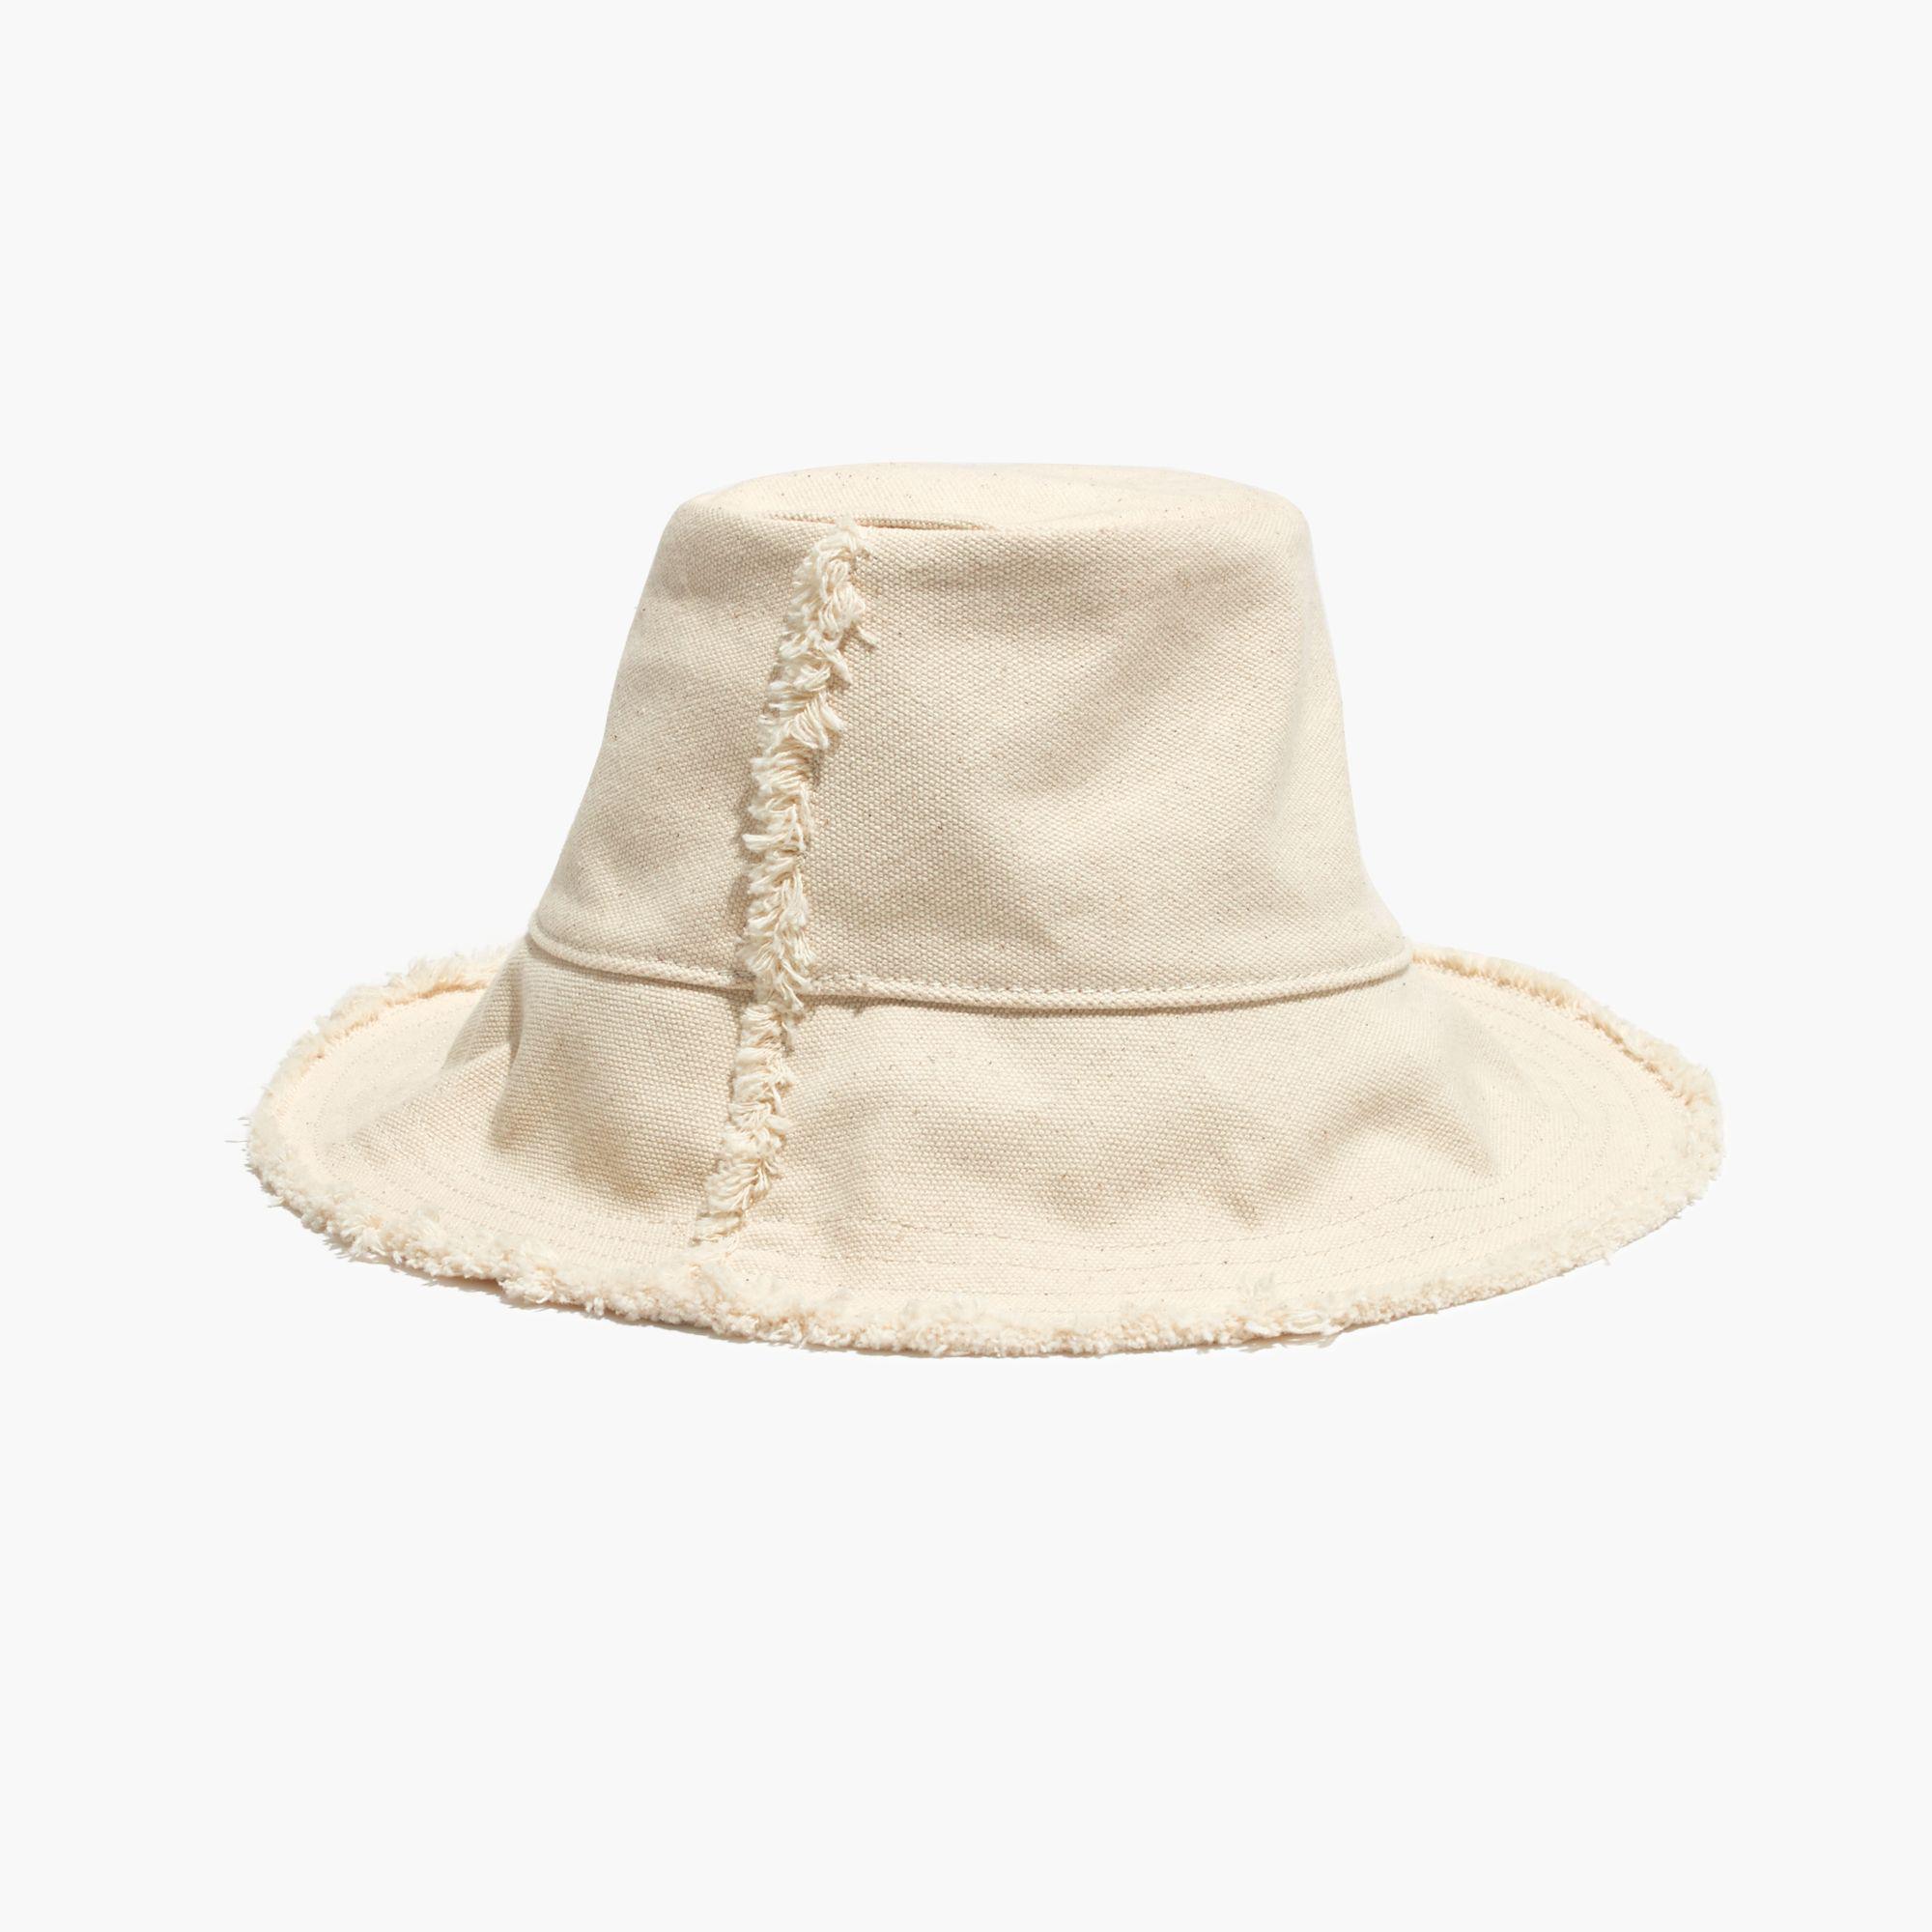 Madewell Canvas Bucket Hat in Natural - Lyst